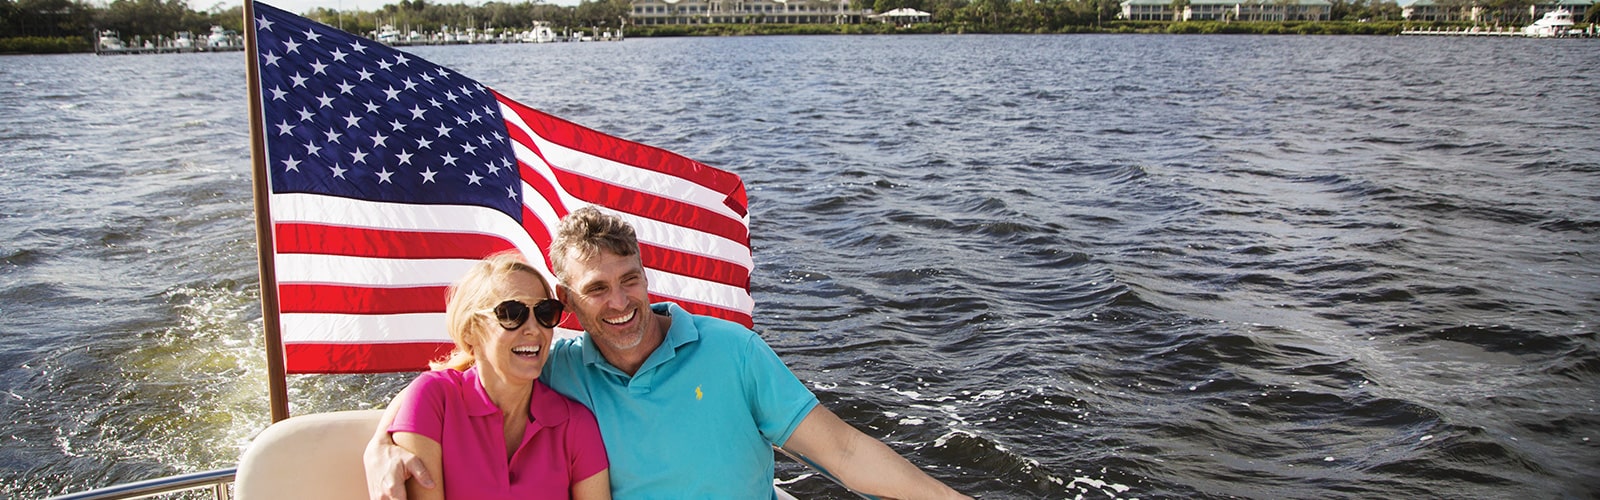 A Must-See Florida Private Club for Avid Golfers with a Passion for Boating